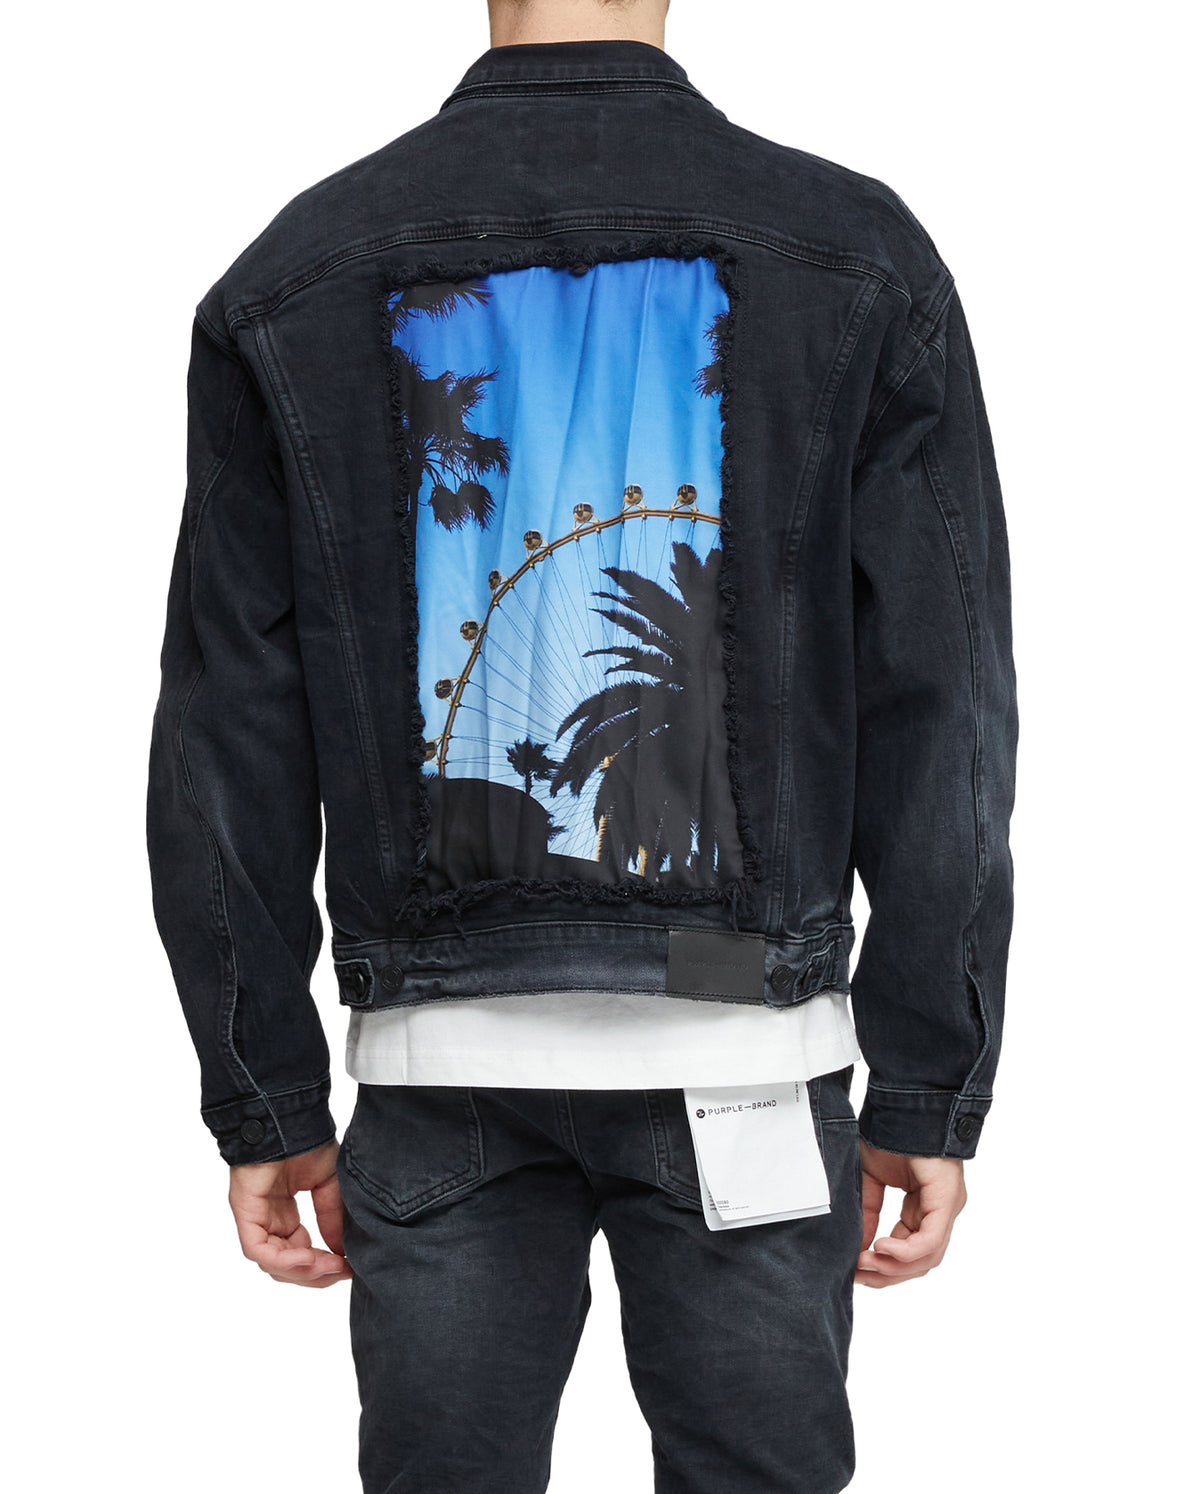 Trucker Jacket With Graphic Print On Back - Black